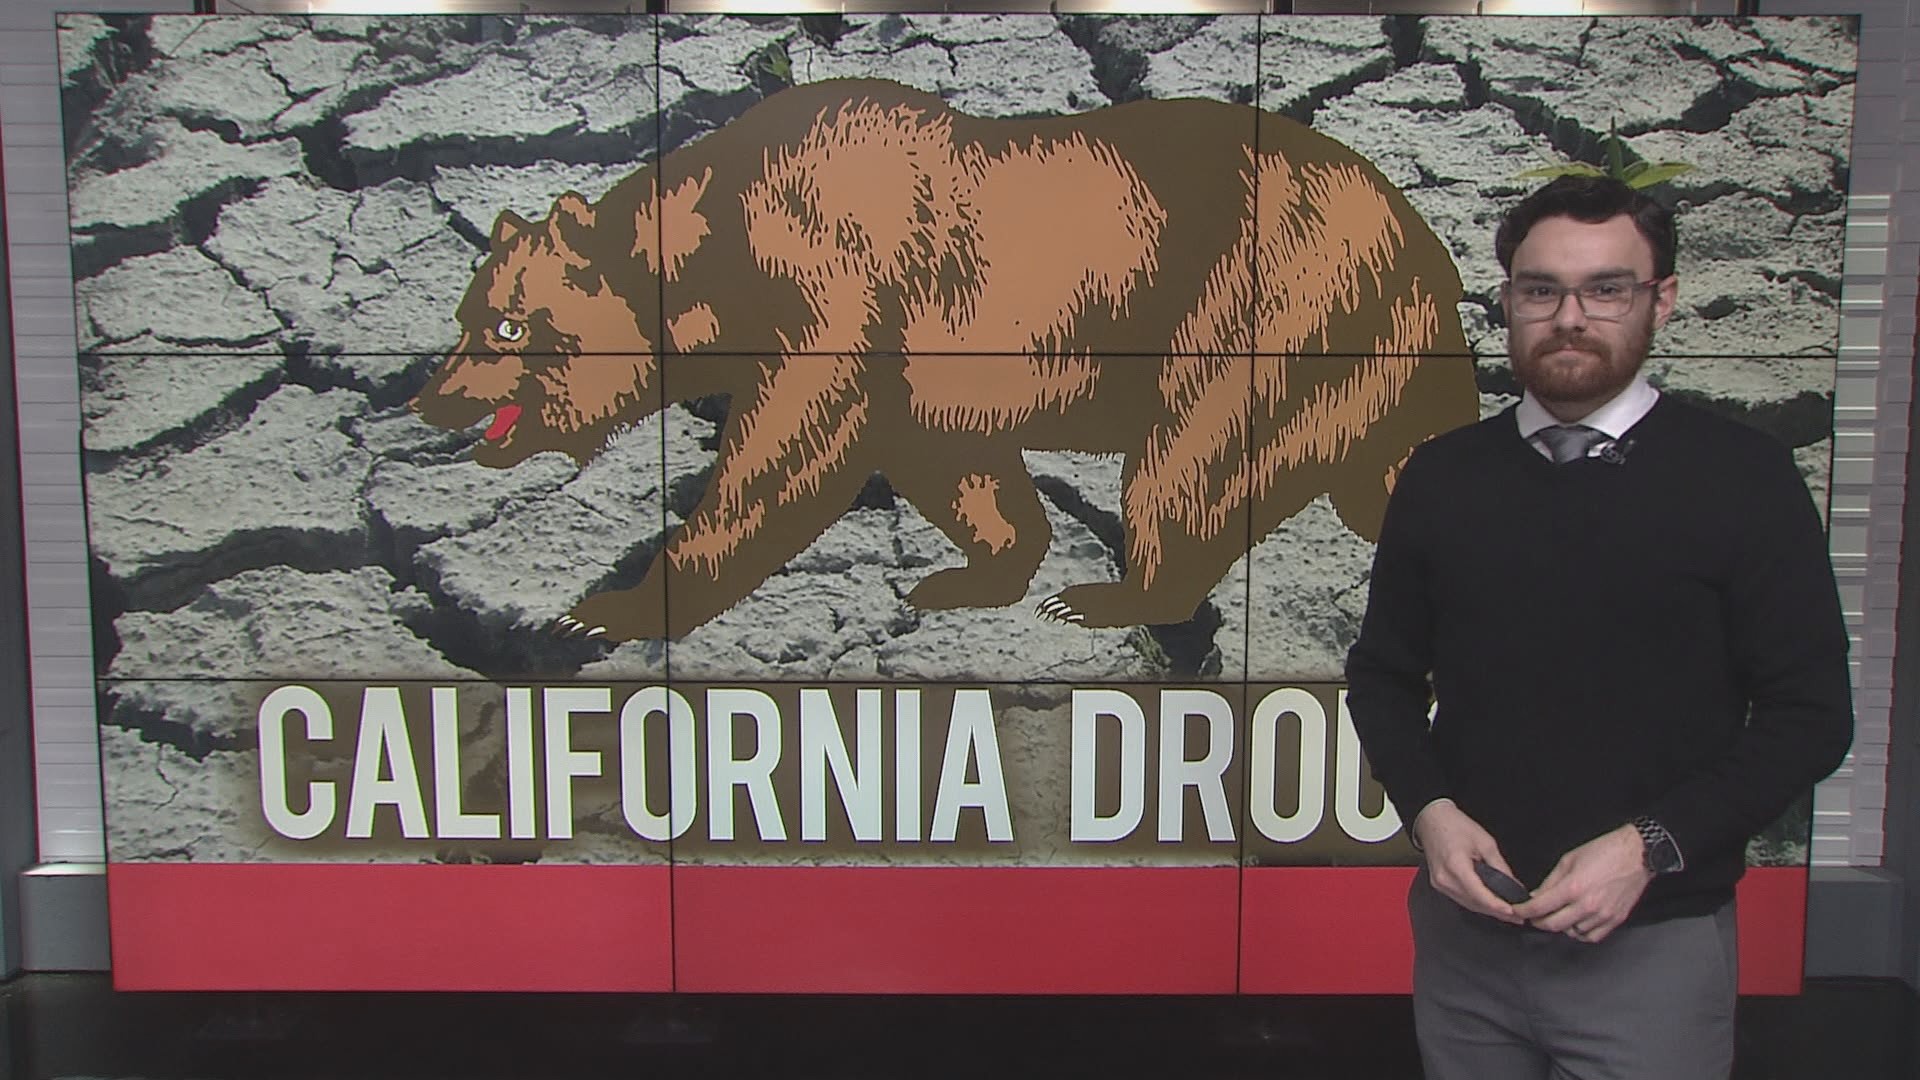 The drought in California has seen significant improvement with all of the recent rainfall! Plus, ABC10 meteorologist Brenden Mincheff went to Folsom to talk water.